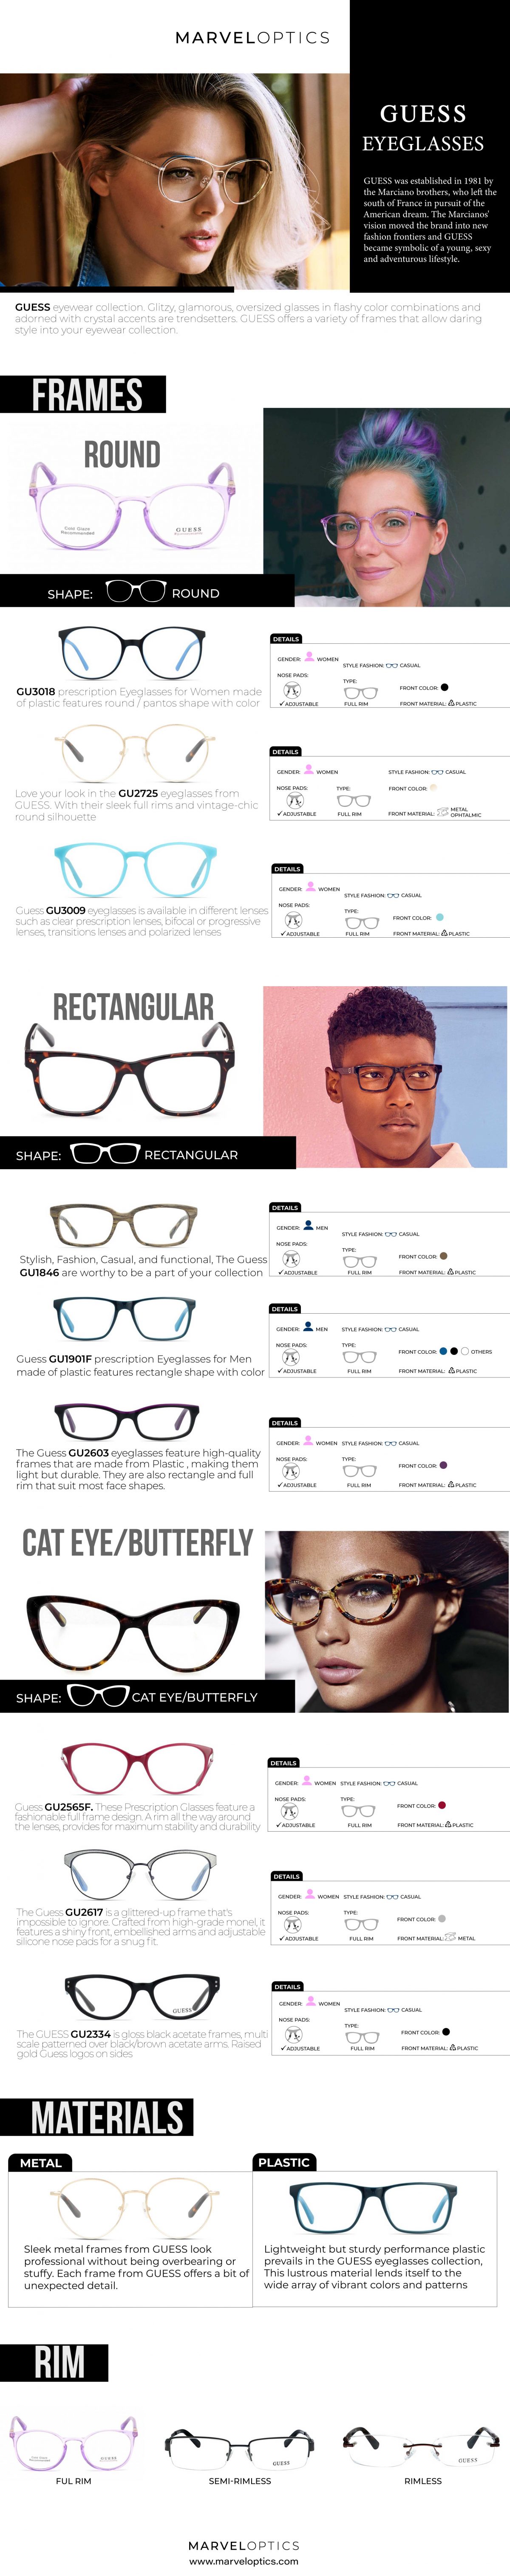 GUESS Eyewear for Women and Men Infographic